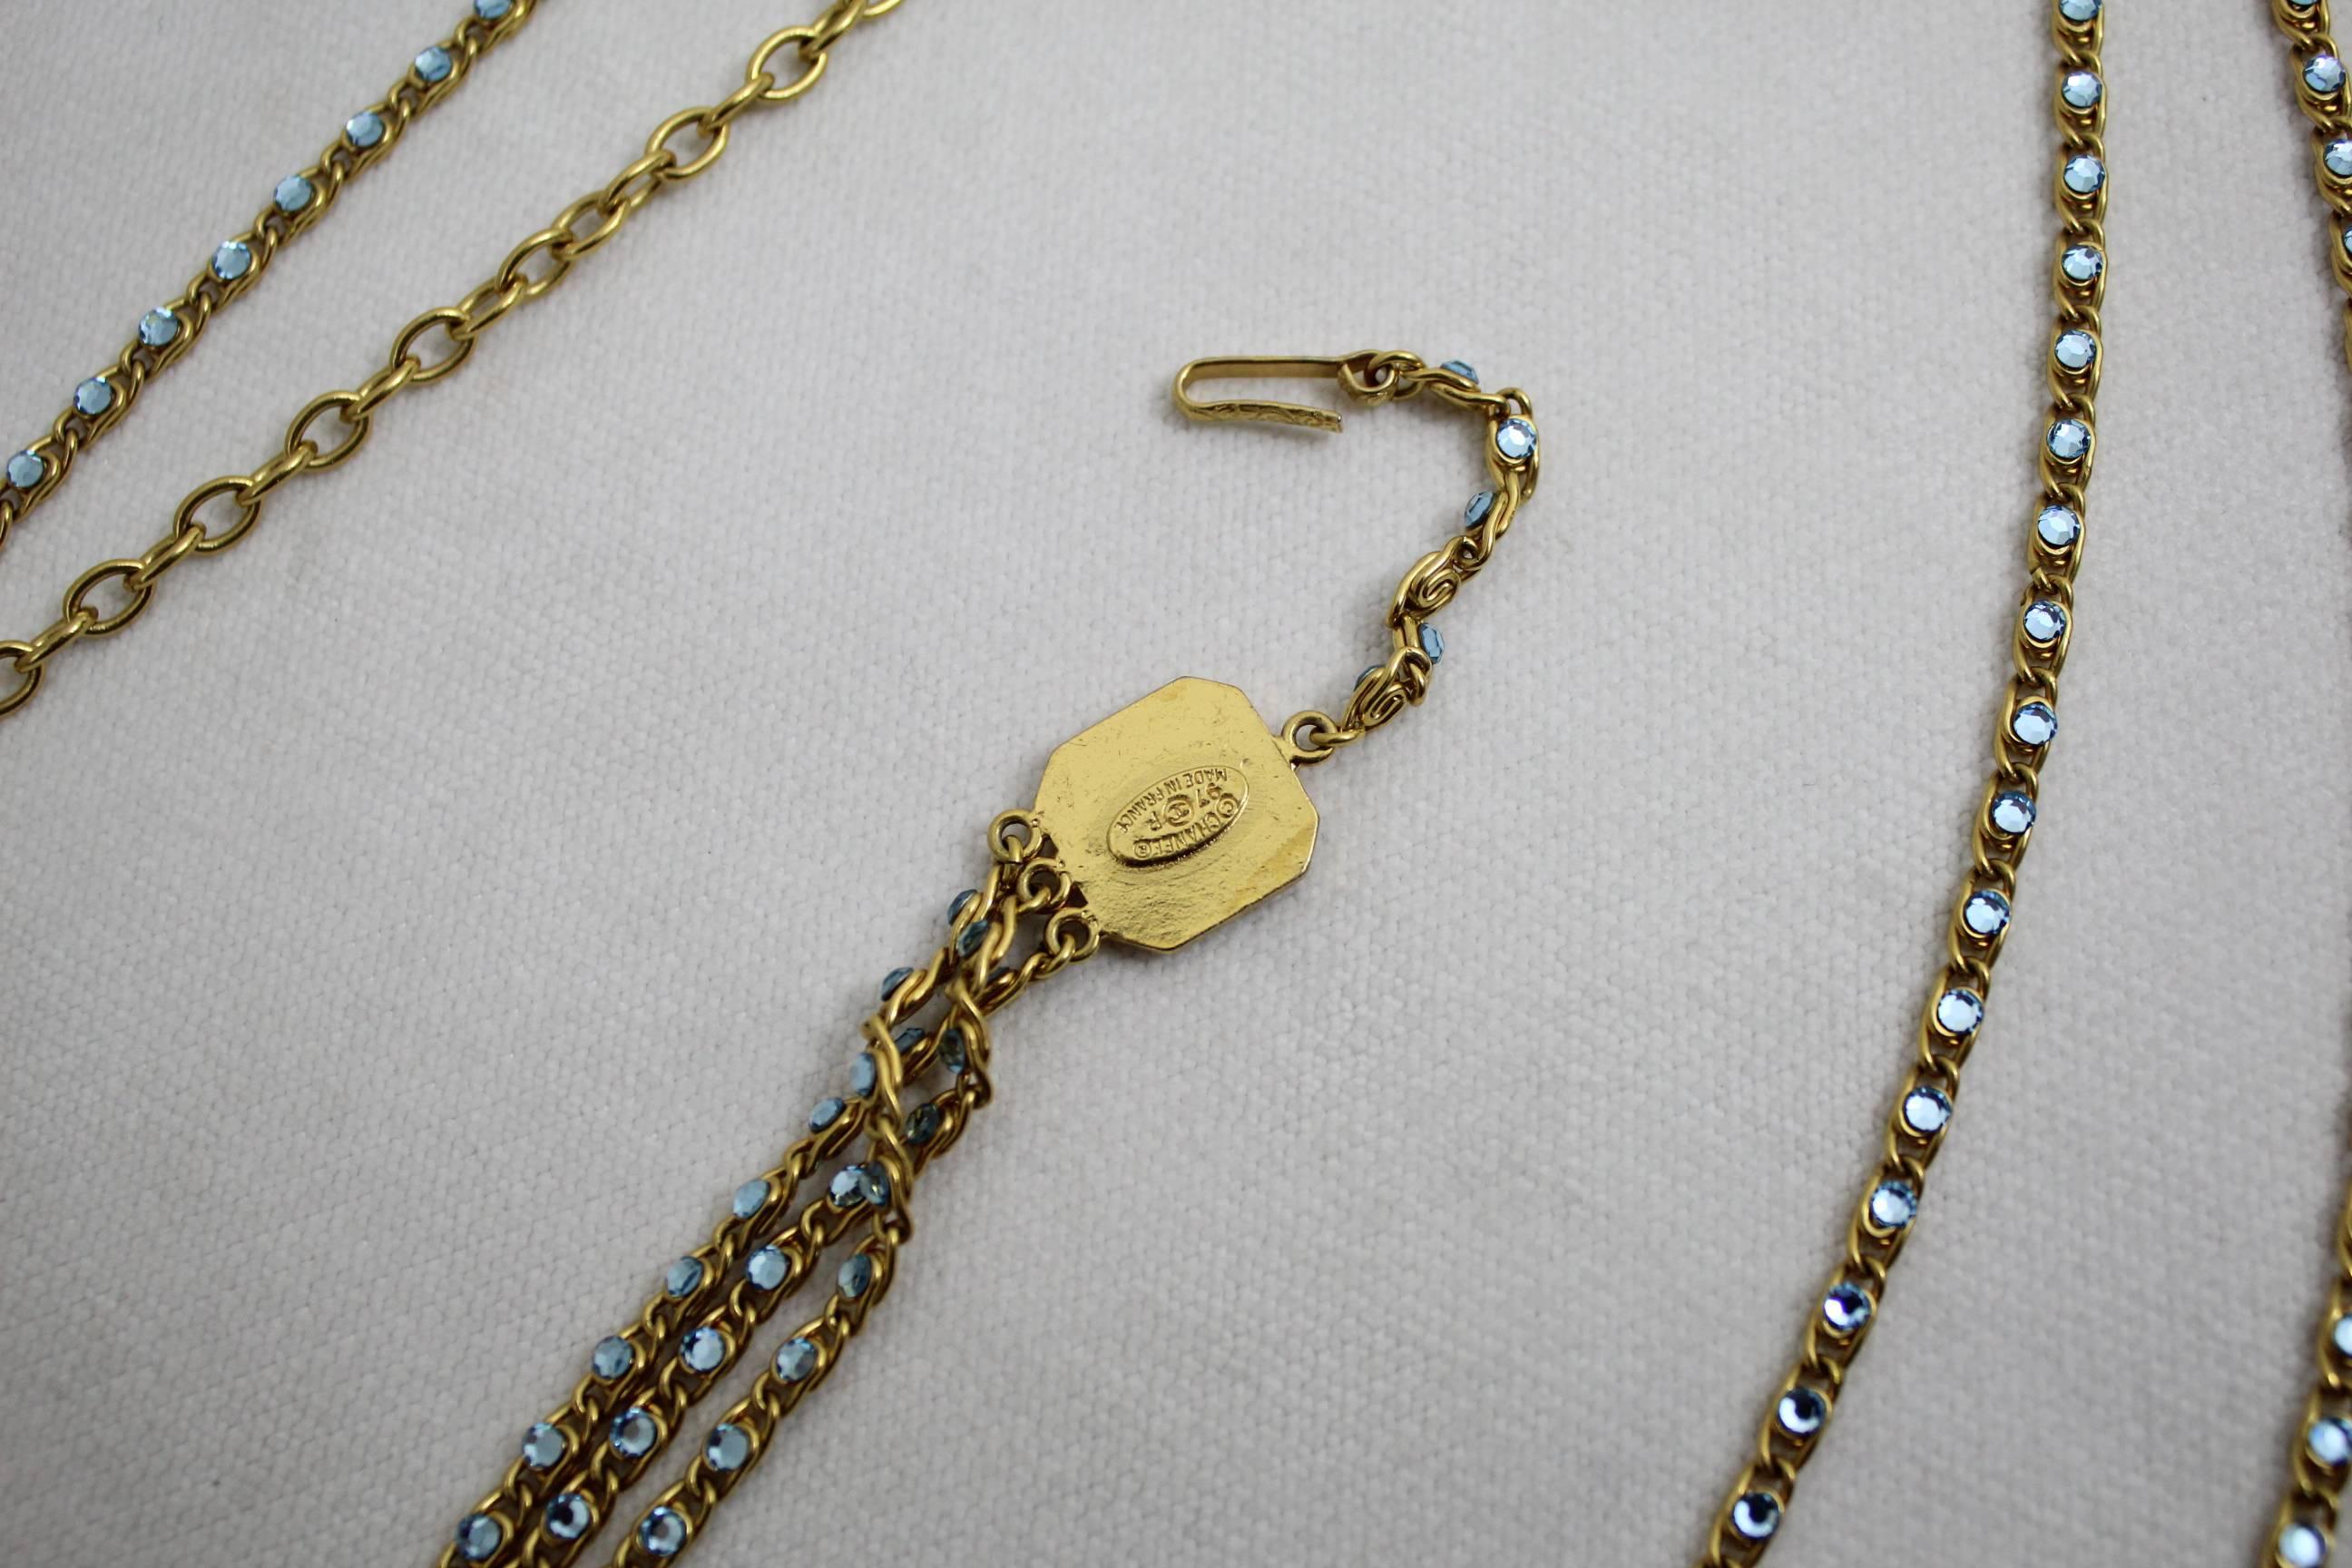 Women's Sophisticated 1997 Chanel Necklace with blue stones and gold plated metal.